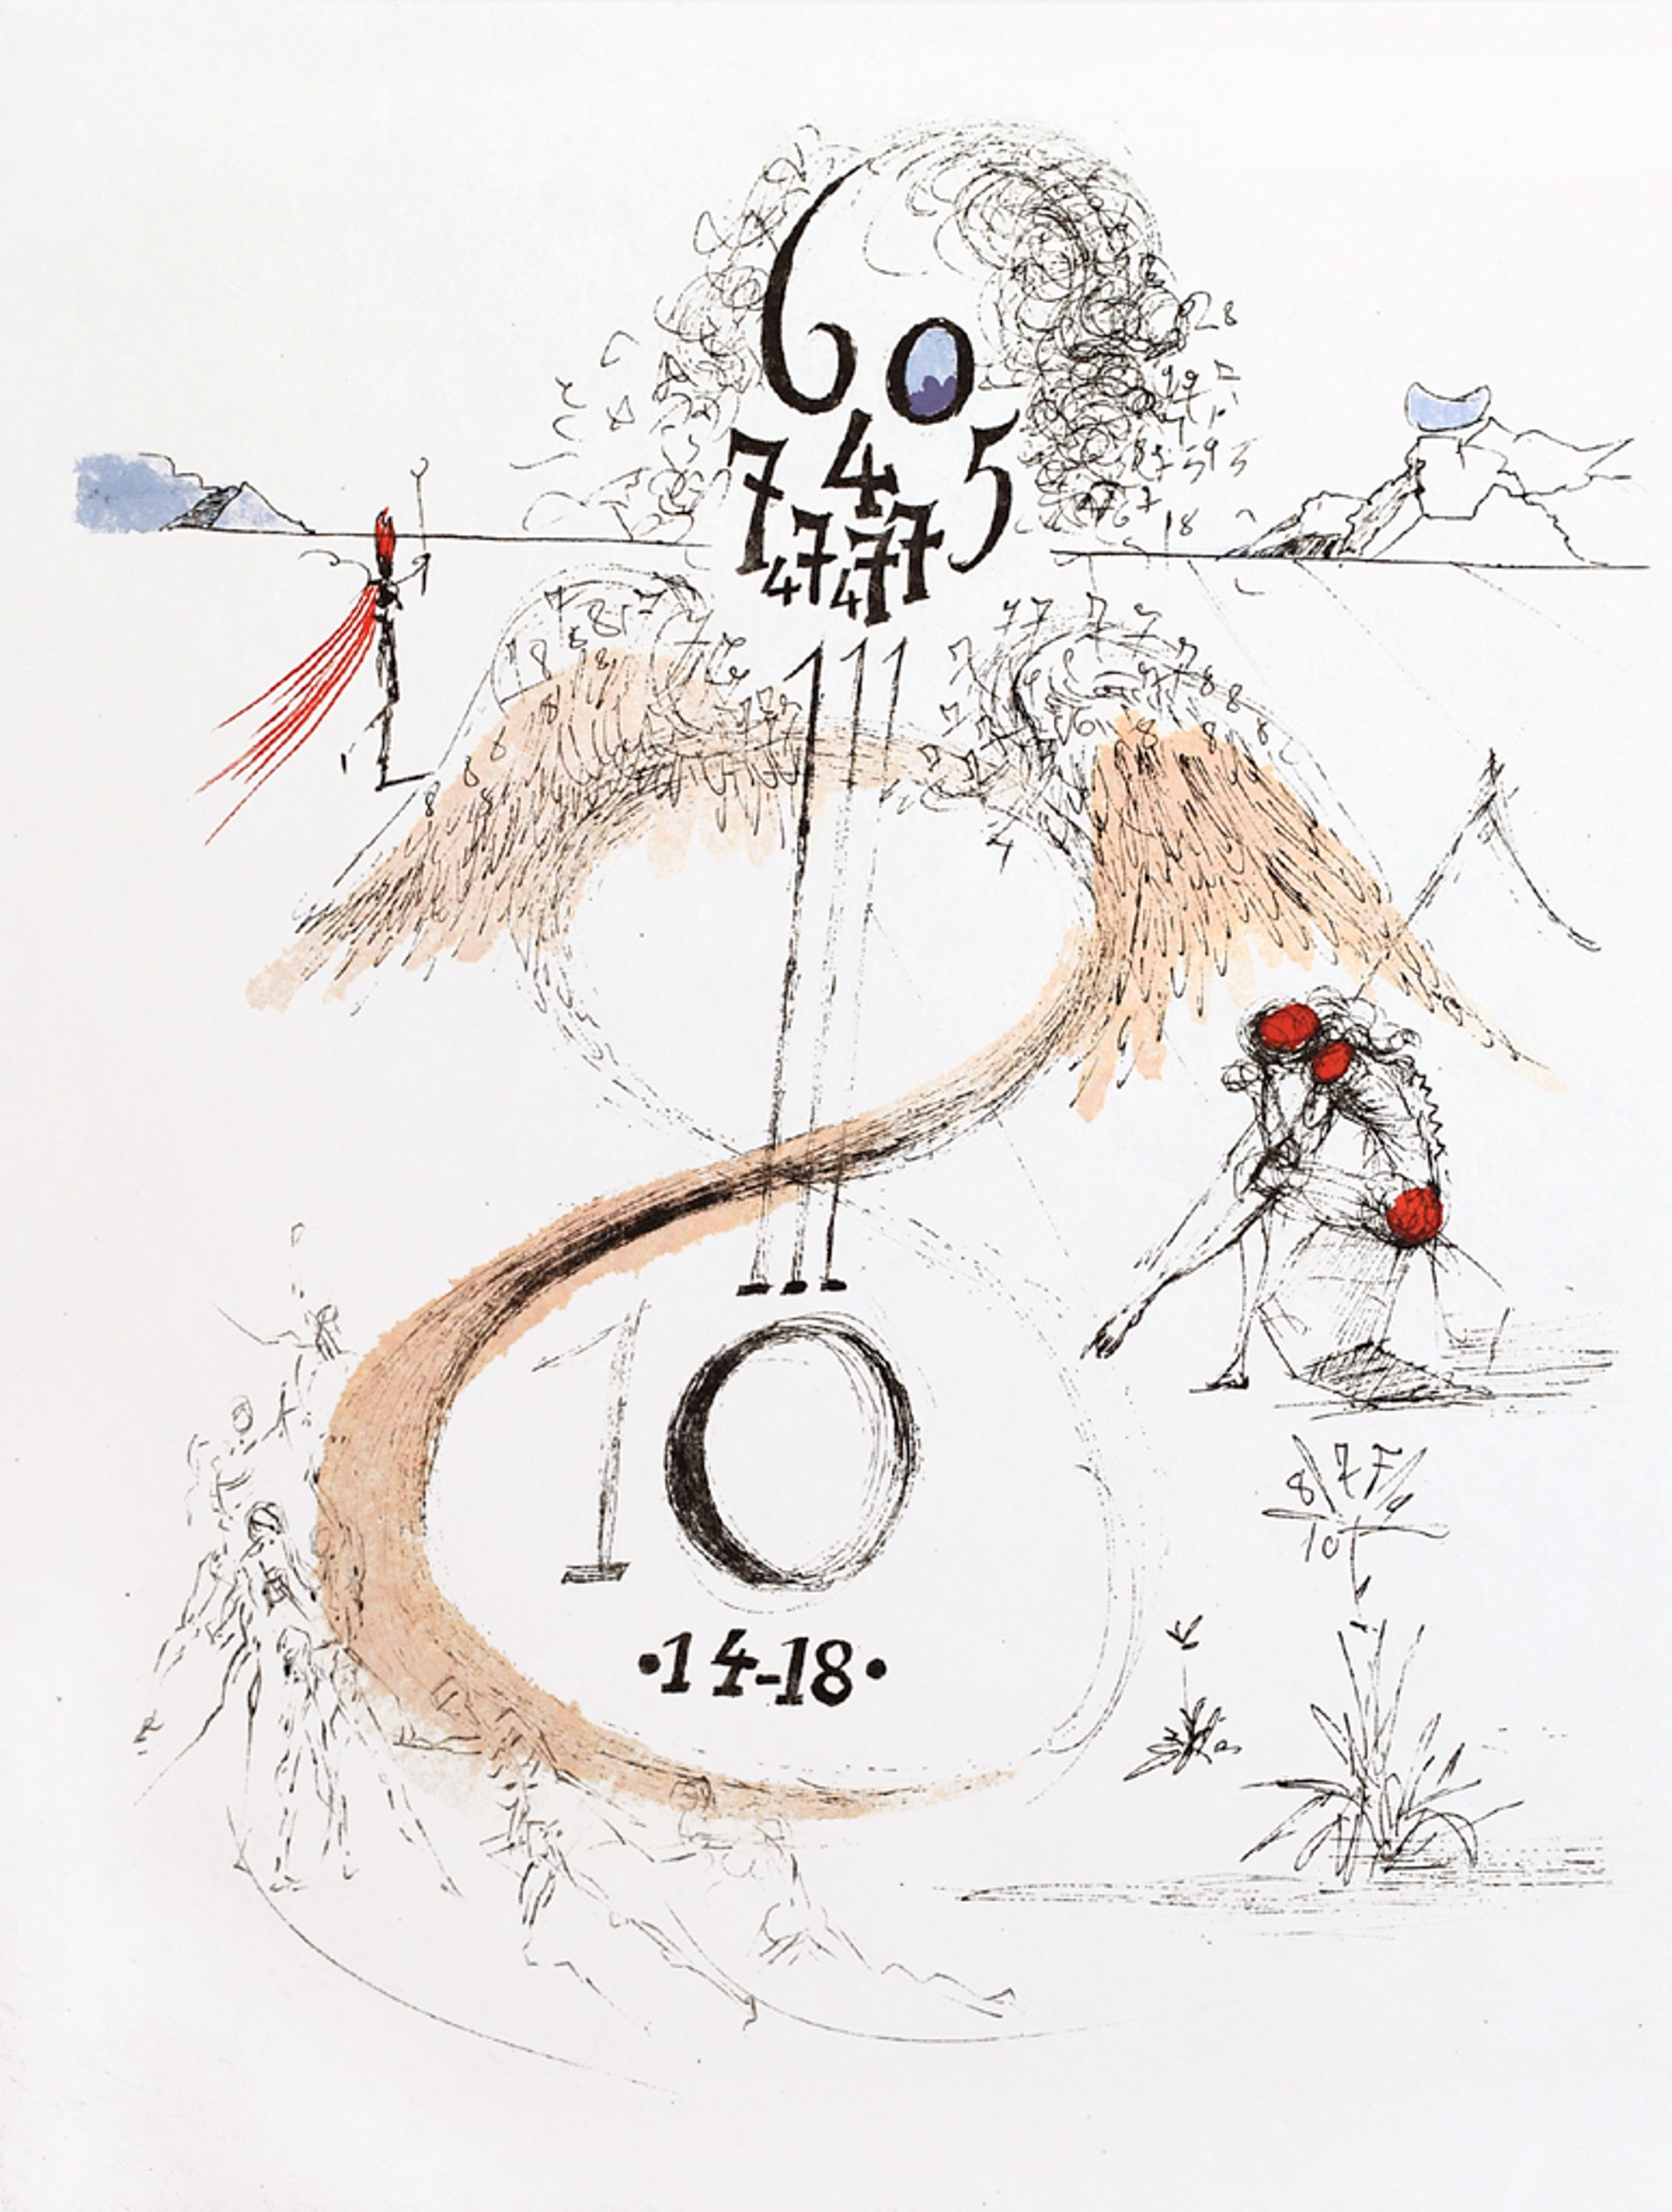 Apollinaire "The 1914-18 War" by Salvador Dali